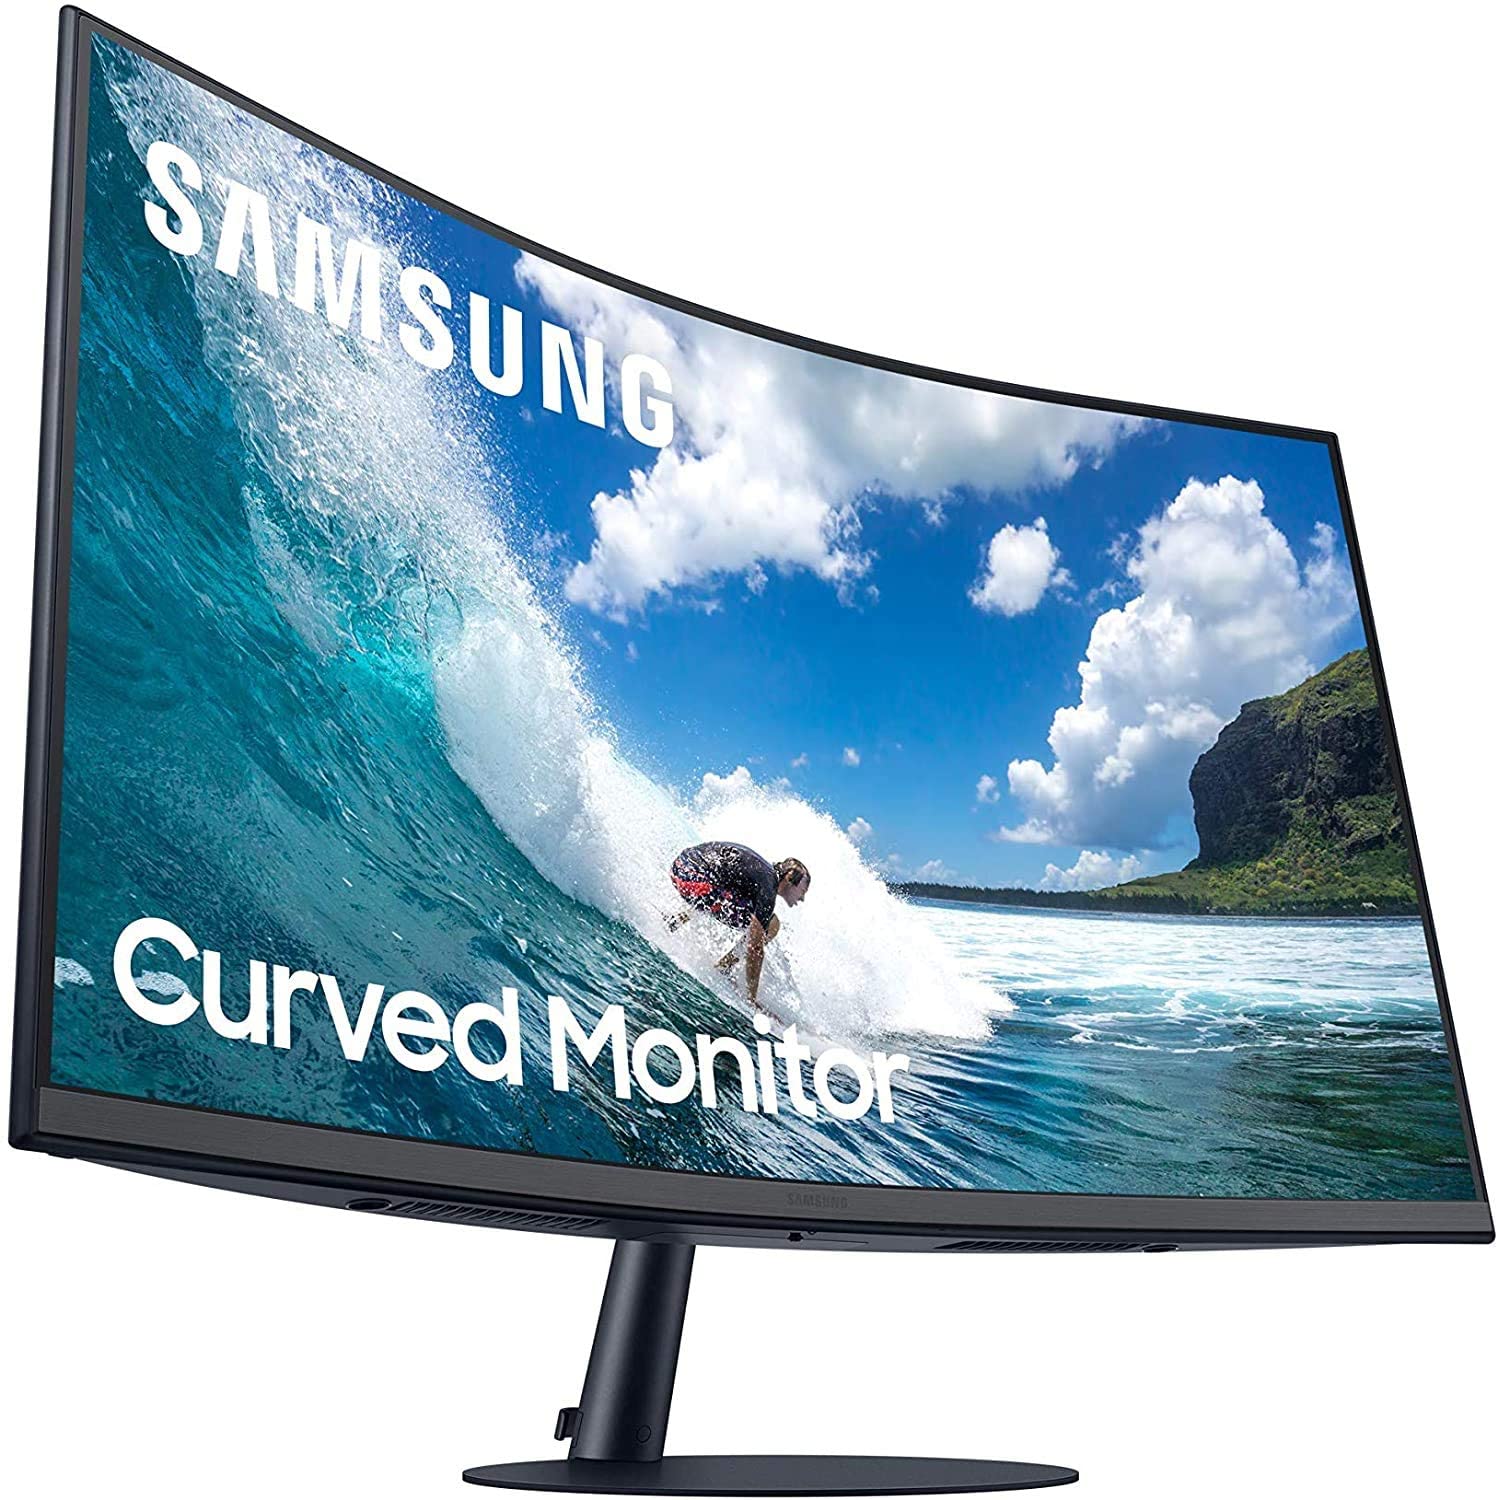 Samsung C32T550FDU 31.5" Full HD Curved LED Monitor 16:9 Response Time